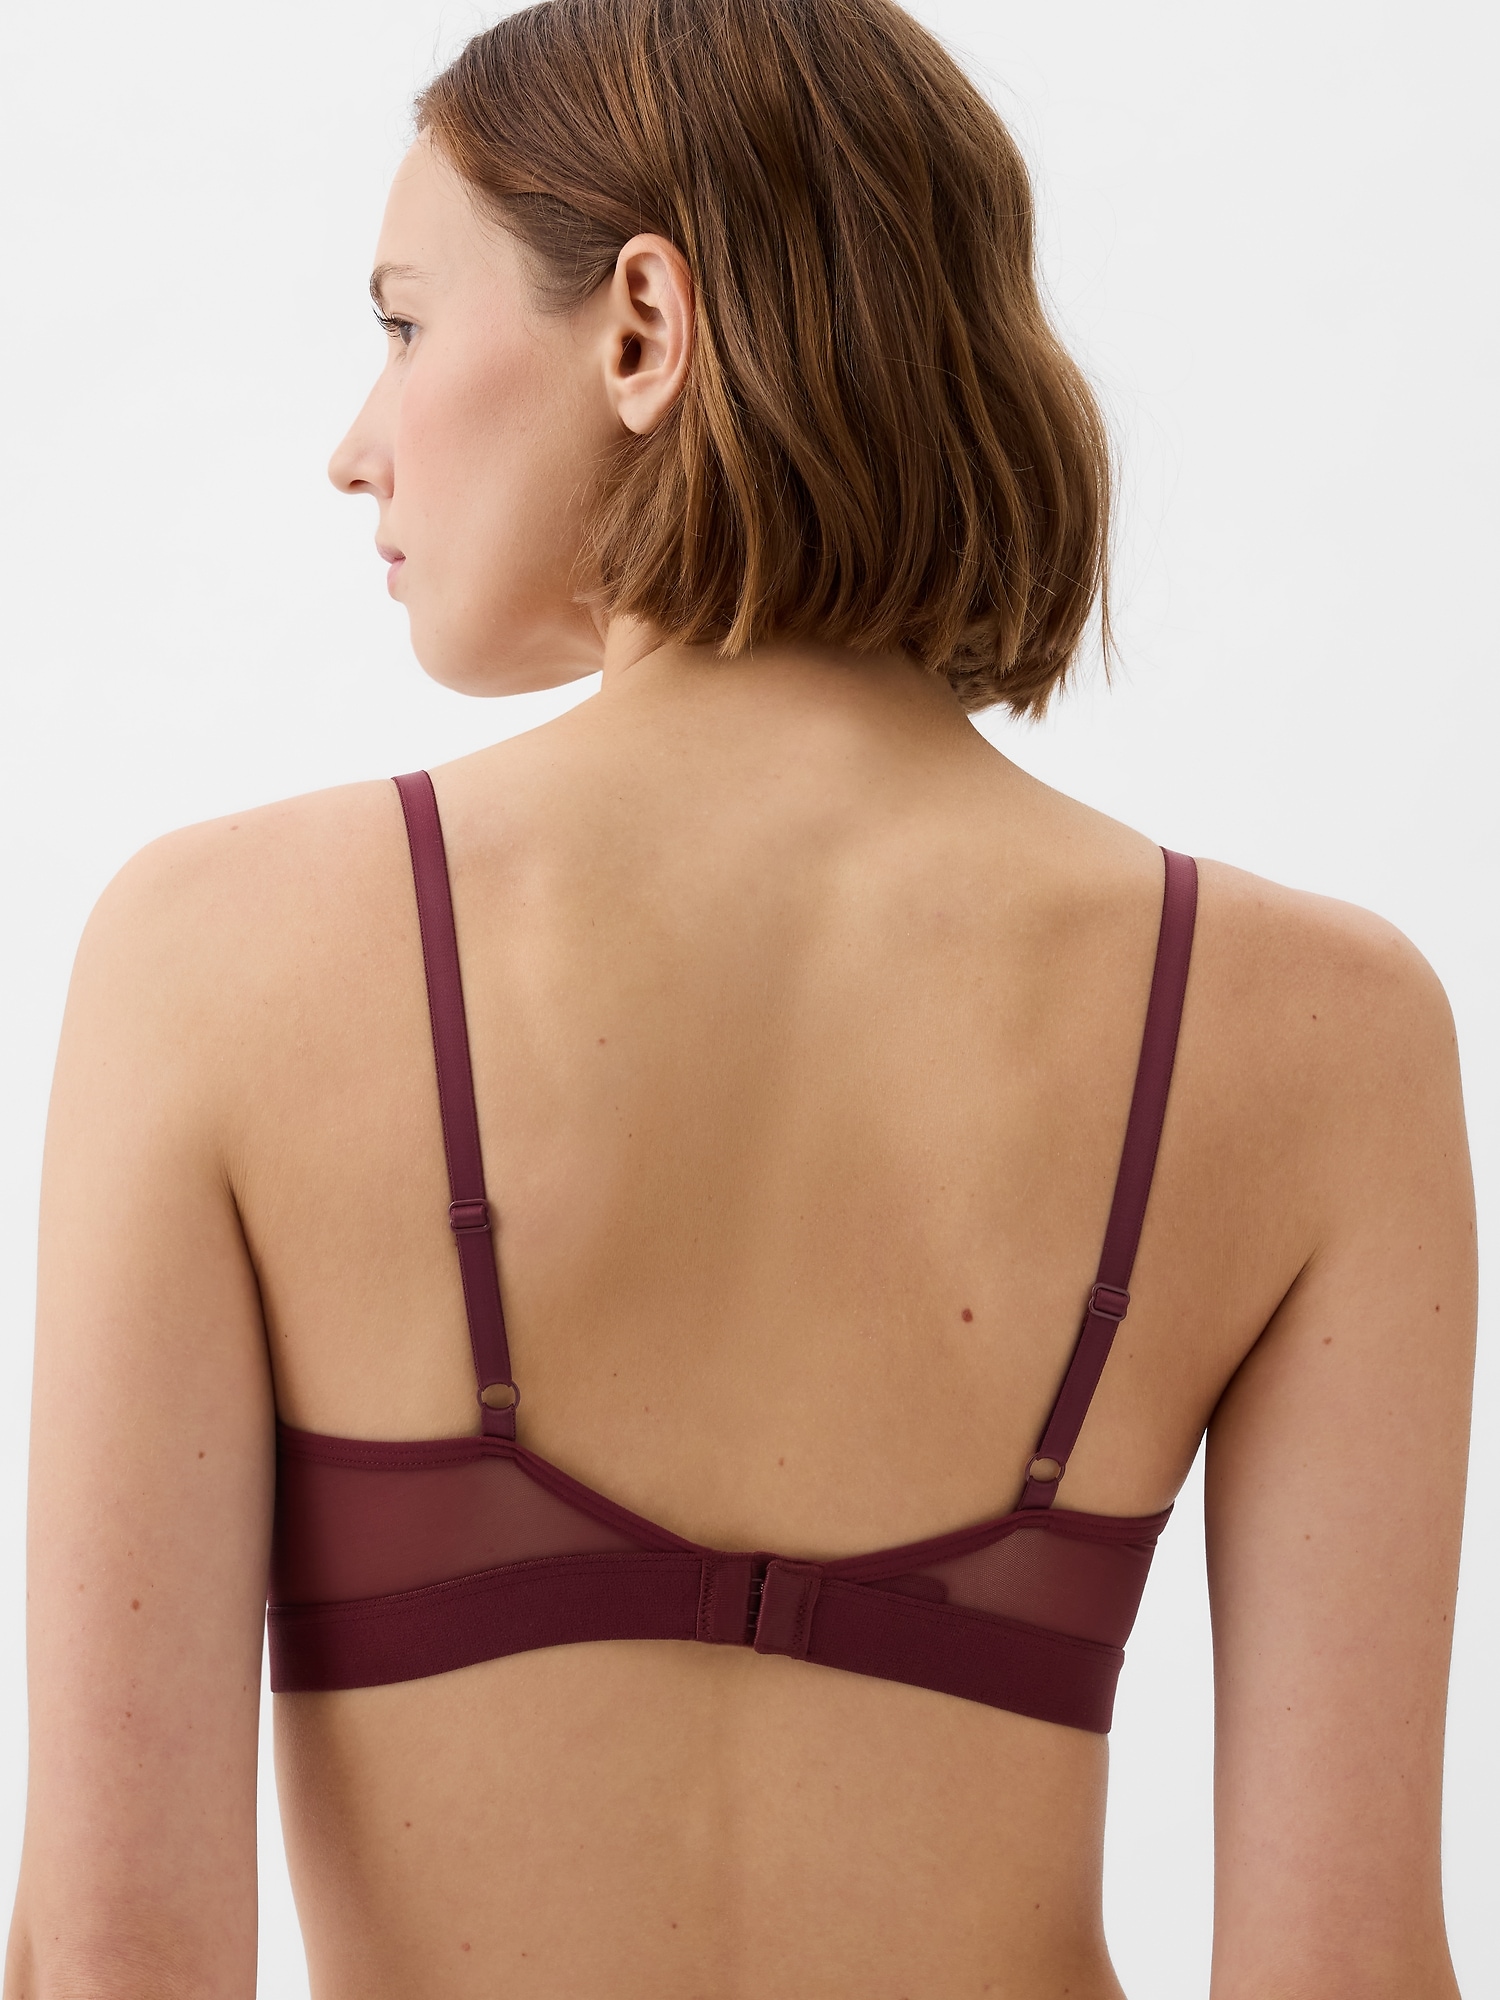 I've Worn This Sexy but Comfy Bralette as Lingerie, a T-Shirt Bra, and Even  a Going-Out Top